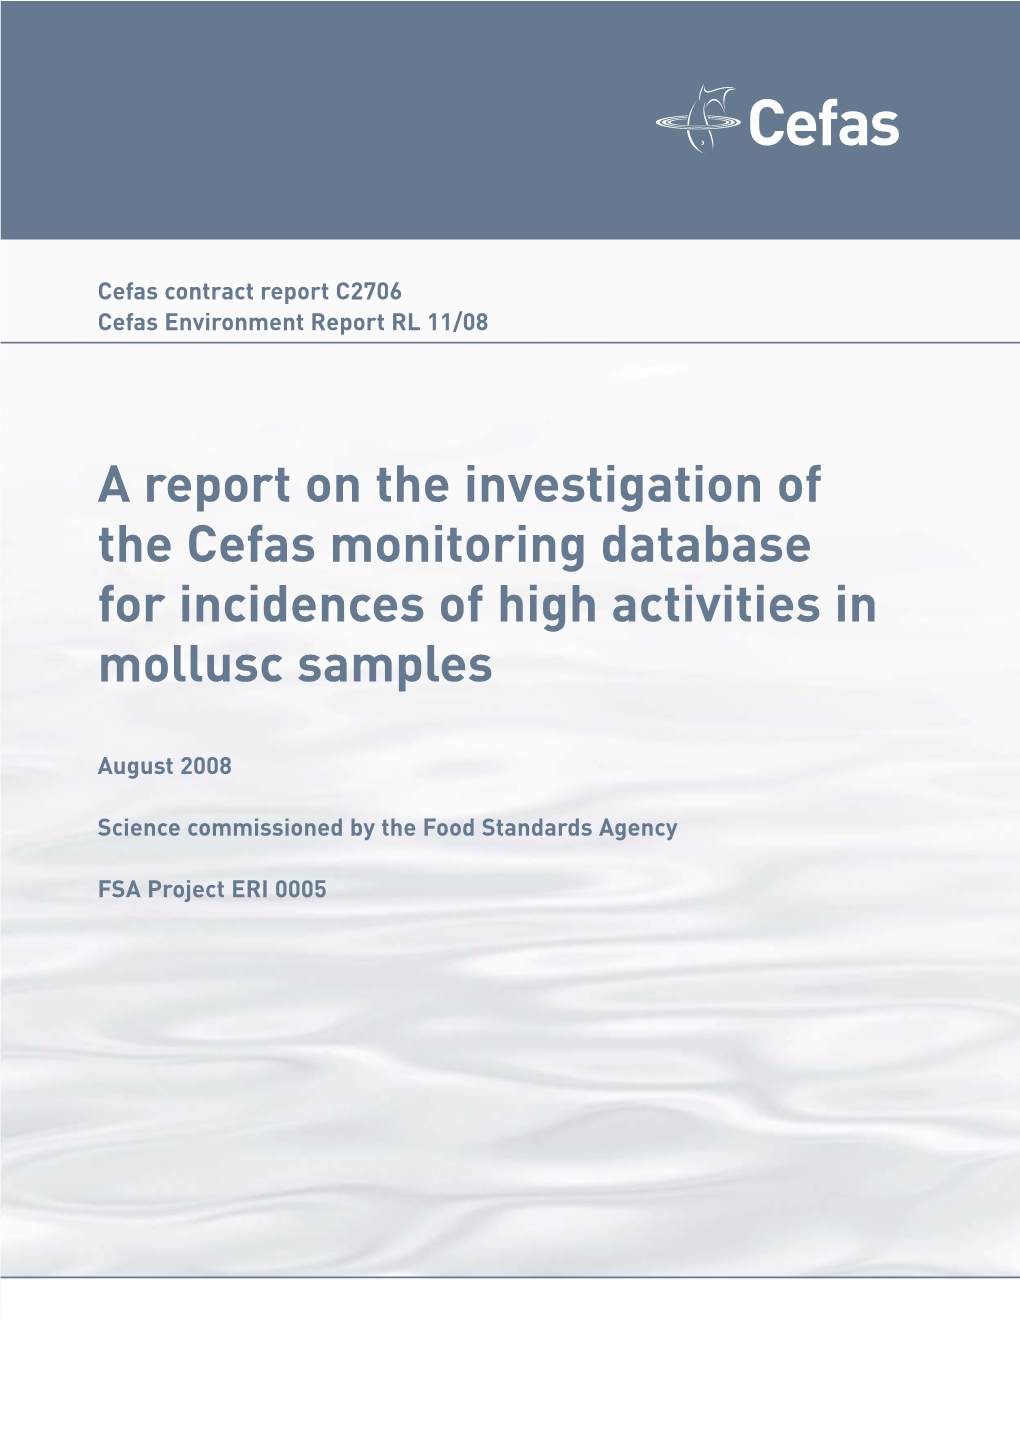 A Report on the Investigation of the Cefas Monitoring Database for Incidences of High Activities in Mollusc Samples